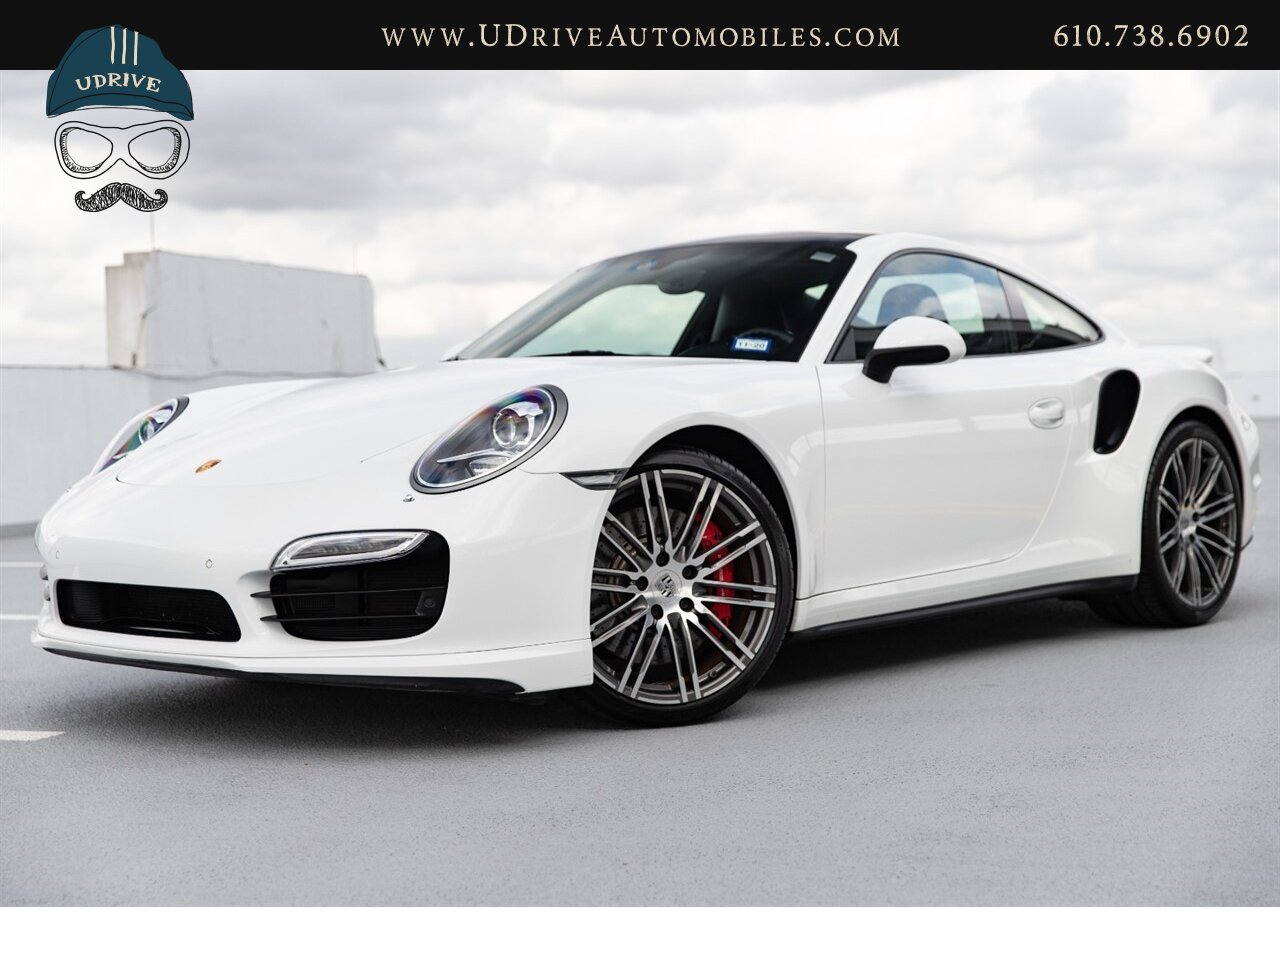 2014 Porsche 911 Turbo 12k Miles White over Black Chrono Rear Wiper  Sport Seats 20in Turbo Whls Sunroof Red Belts - Photo 1 - West Chester, PA 19382